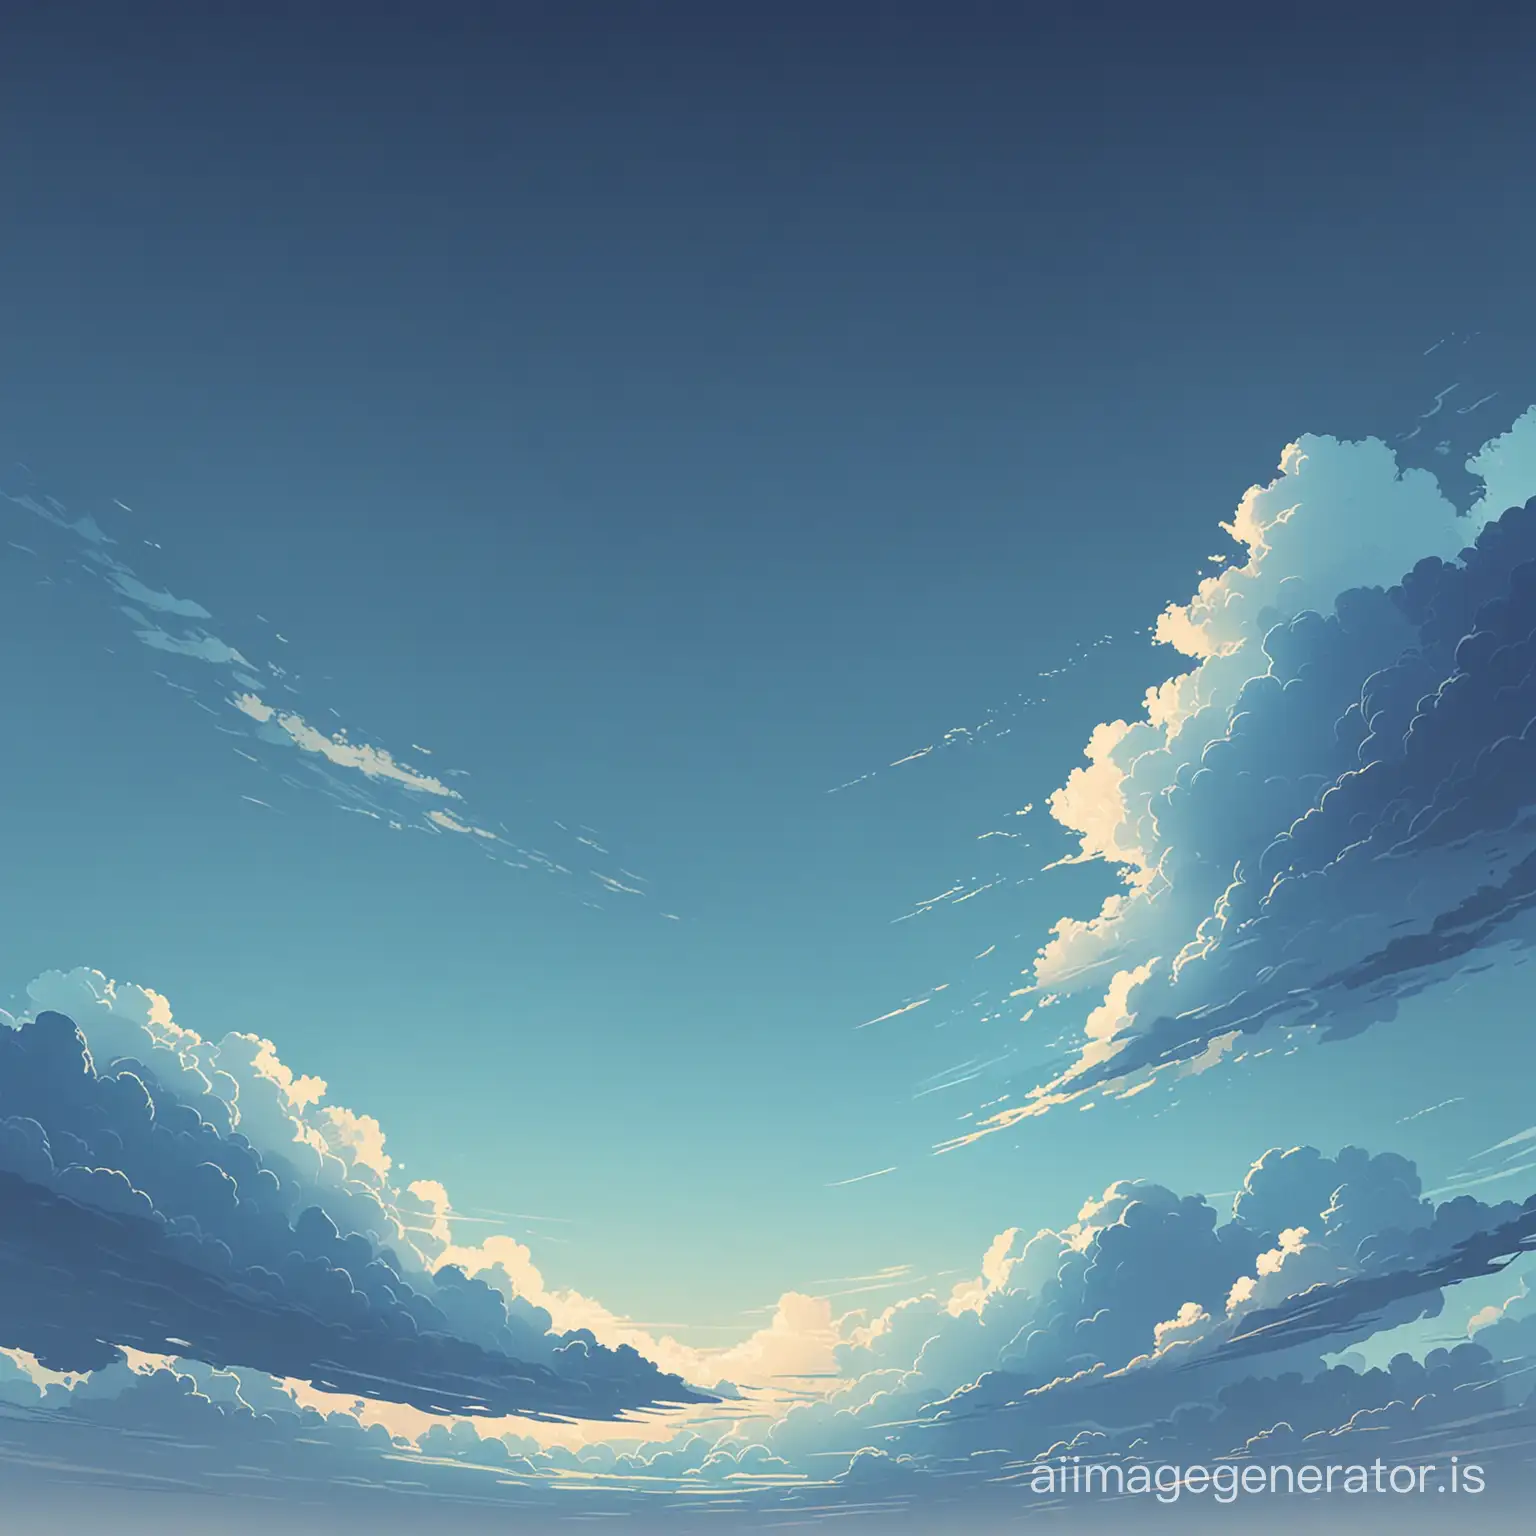 Serene-Blue-Sky-Gradient-with-Distant-Clouds-Illustration